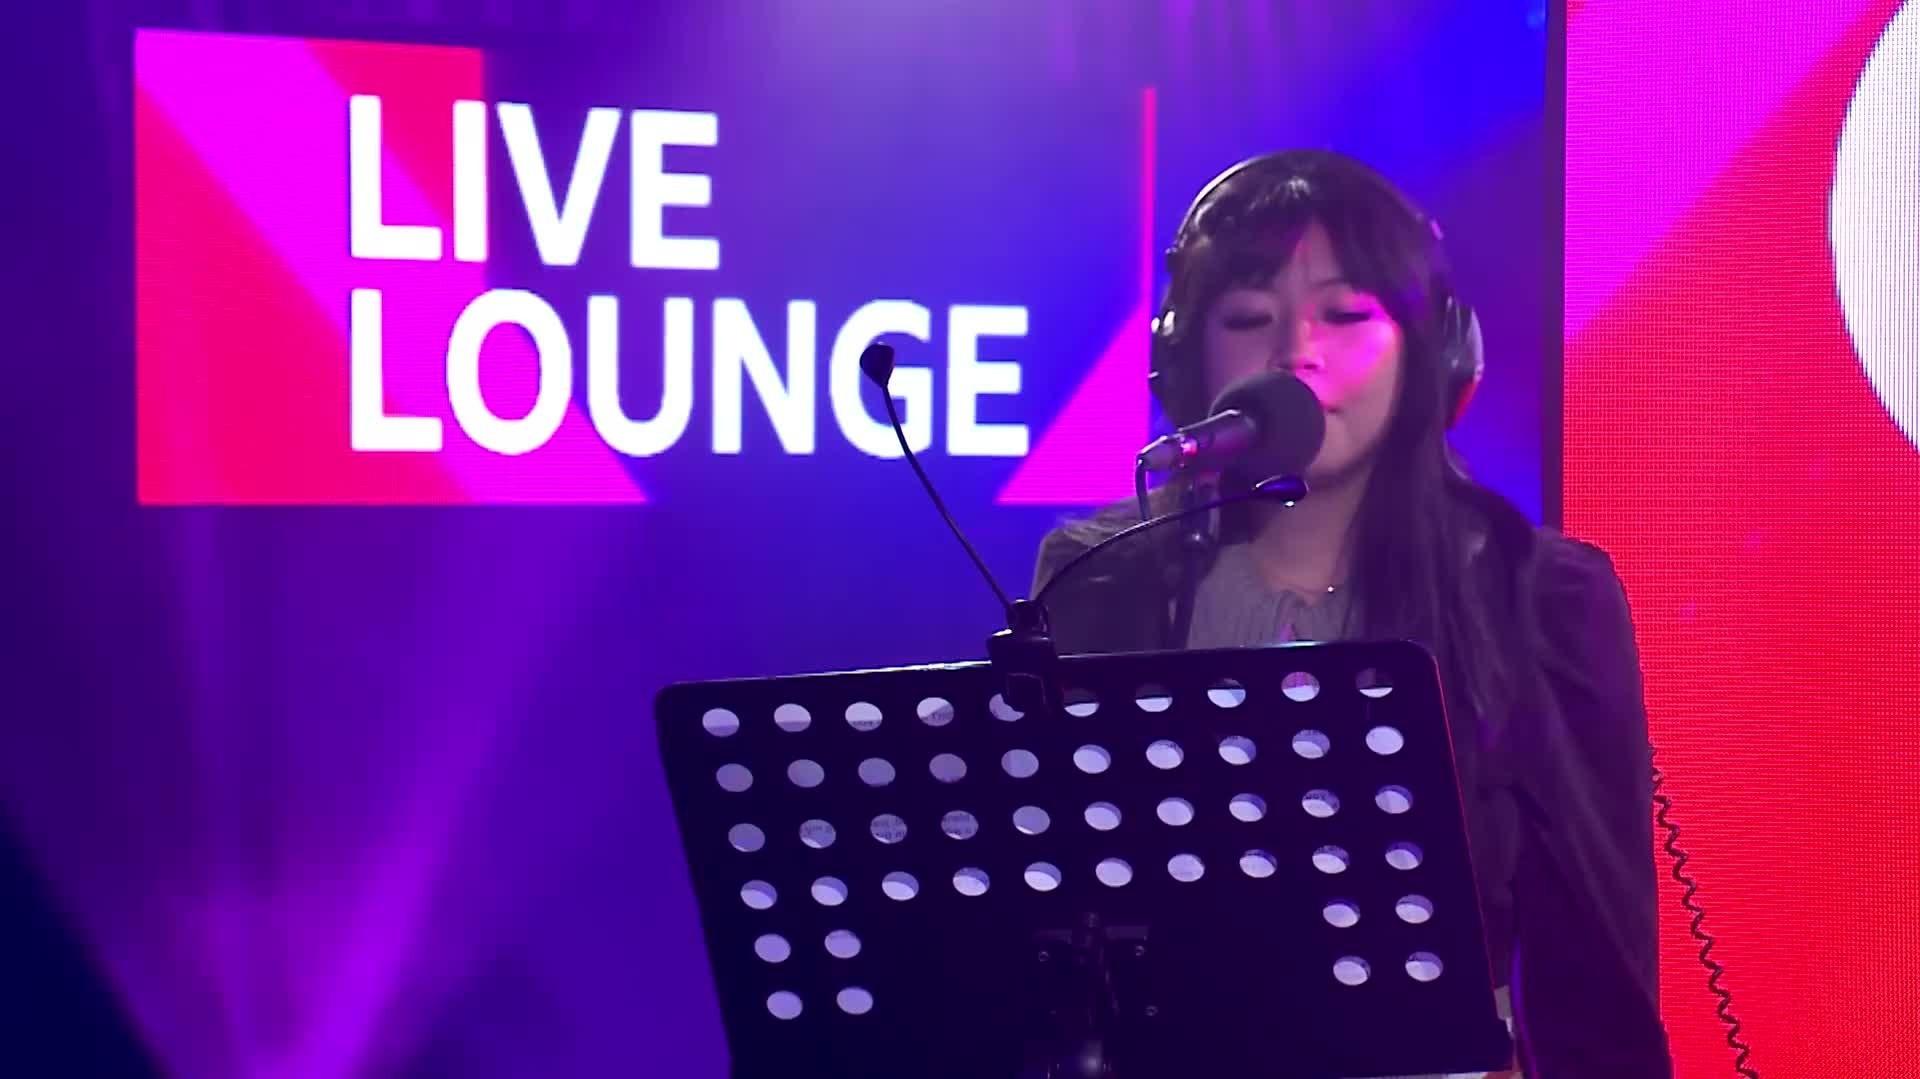 beabadoobee - A Thousand Miles in the Live Lounge